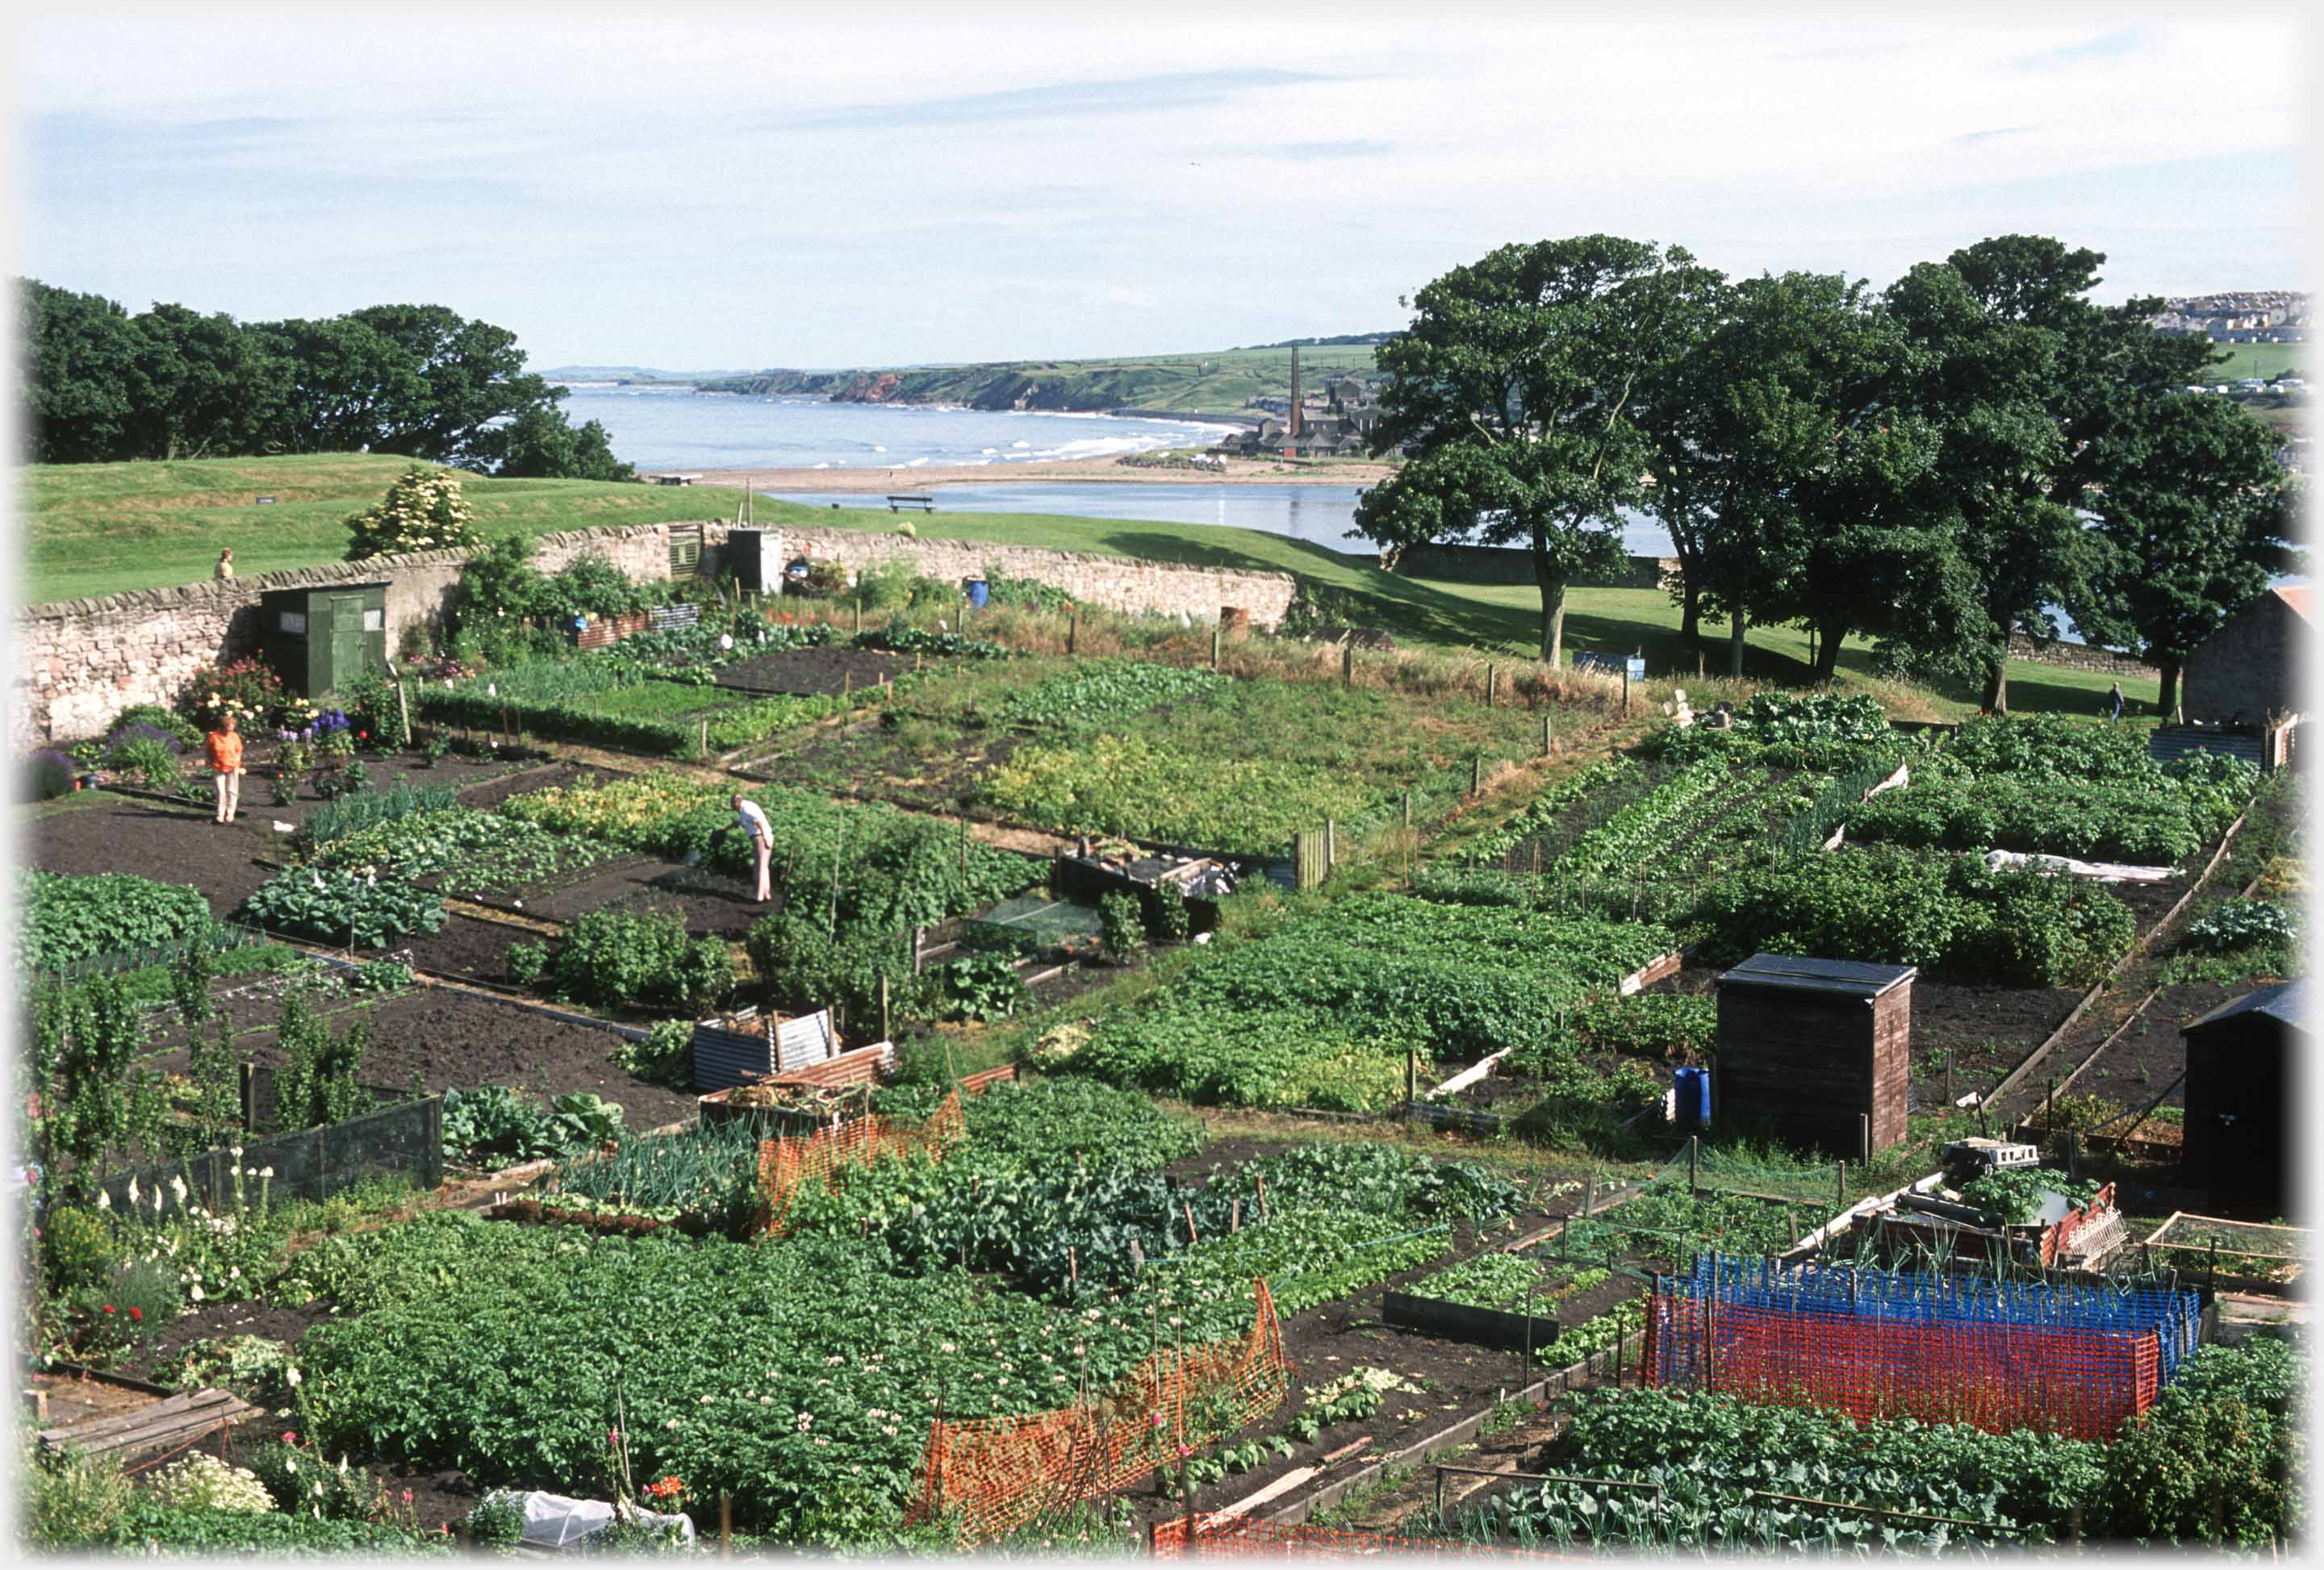 Allotments in full growth with coastline in background.